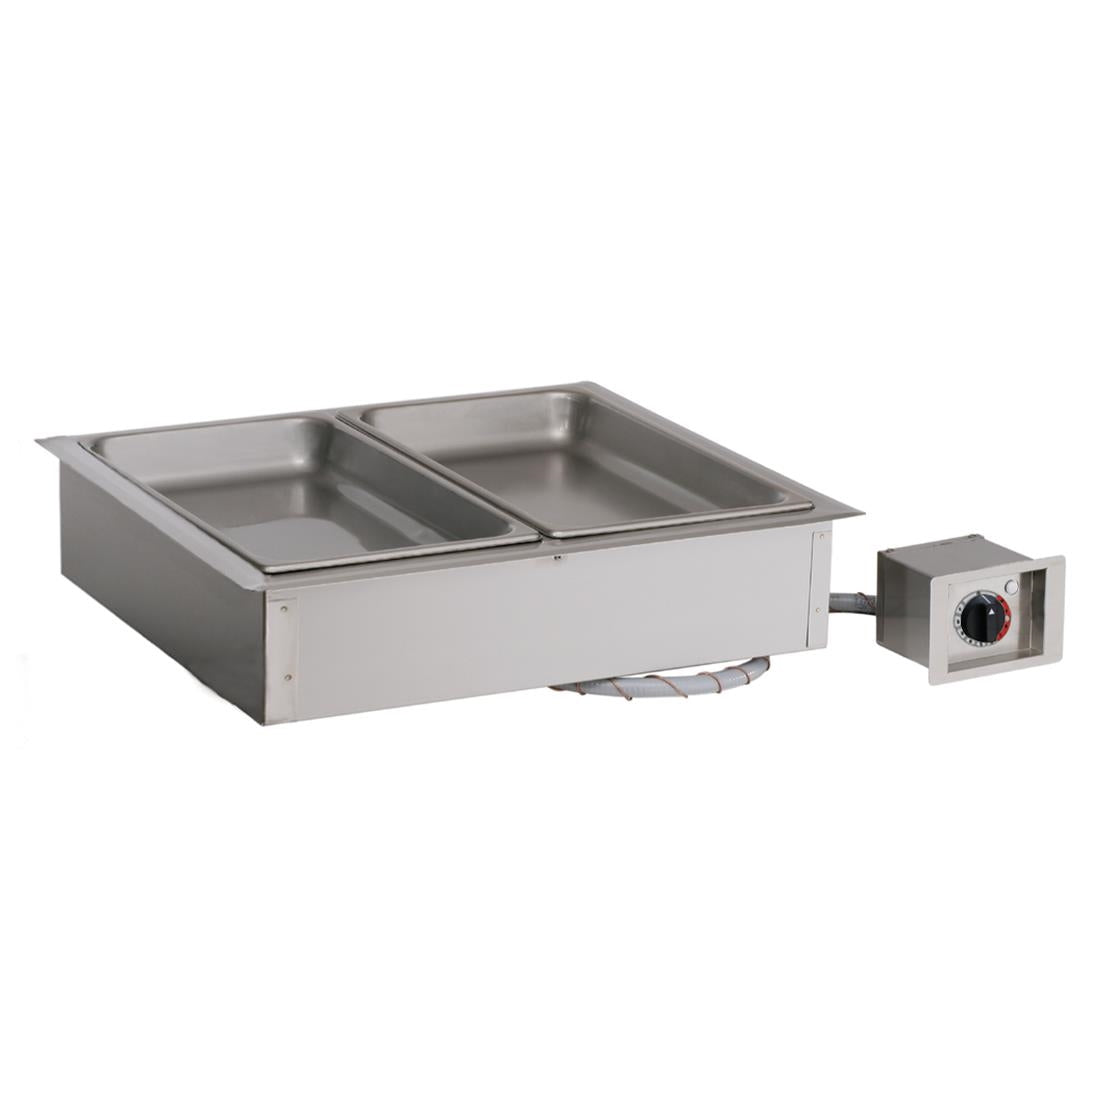 FP573 Alto-Shaam Two-Pan Hot Food Well 200-HW/D6 JD Catering Equipment Solutions Ltd